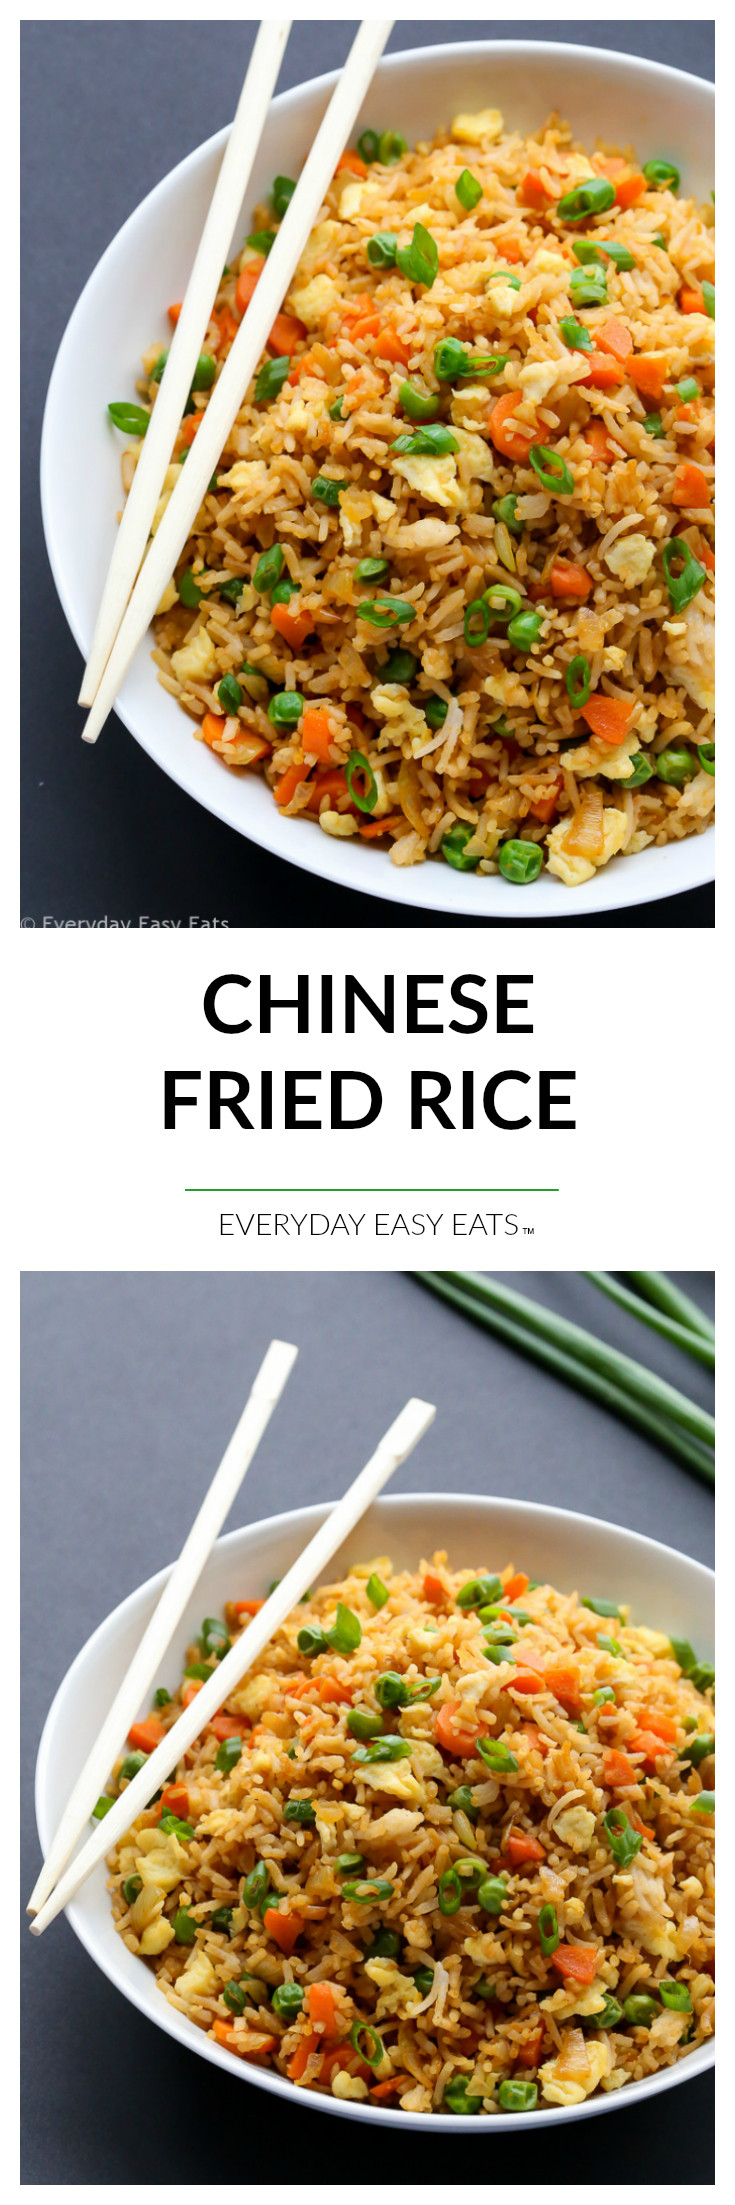 Chinese Fried Rice Recipe Easy
 Chinese Fried Rice Better than Takeout